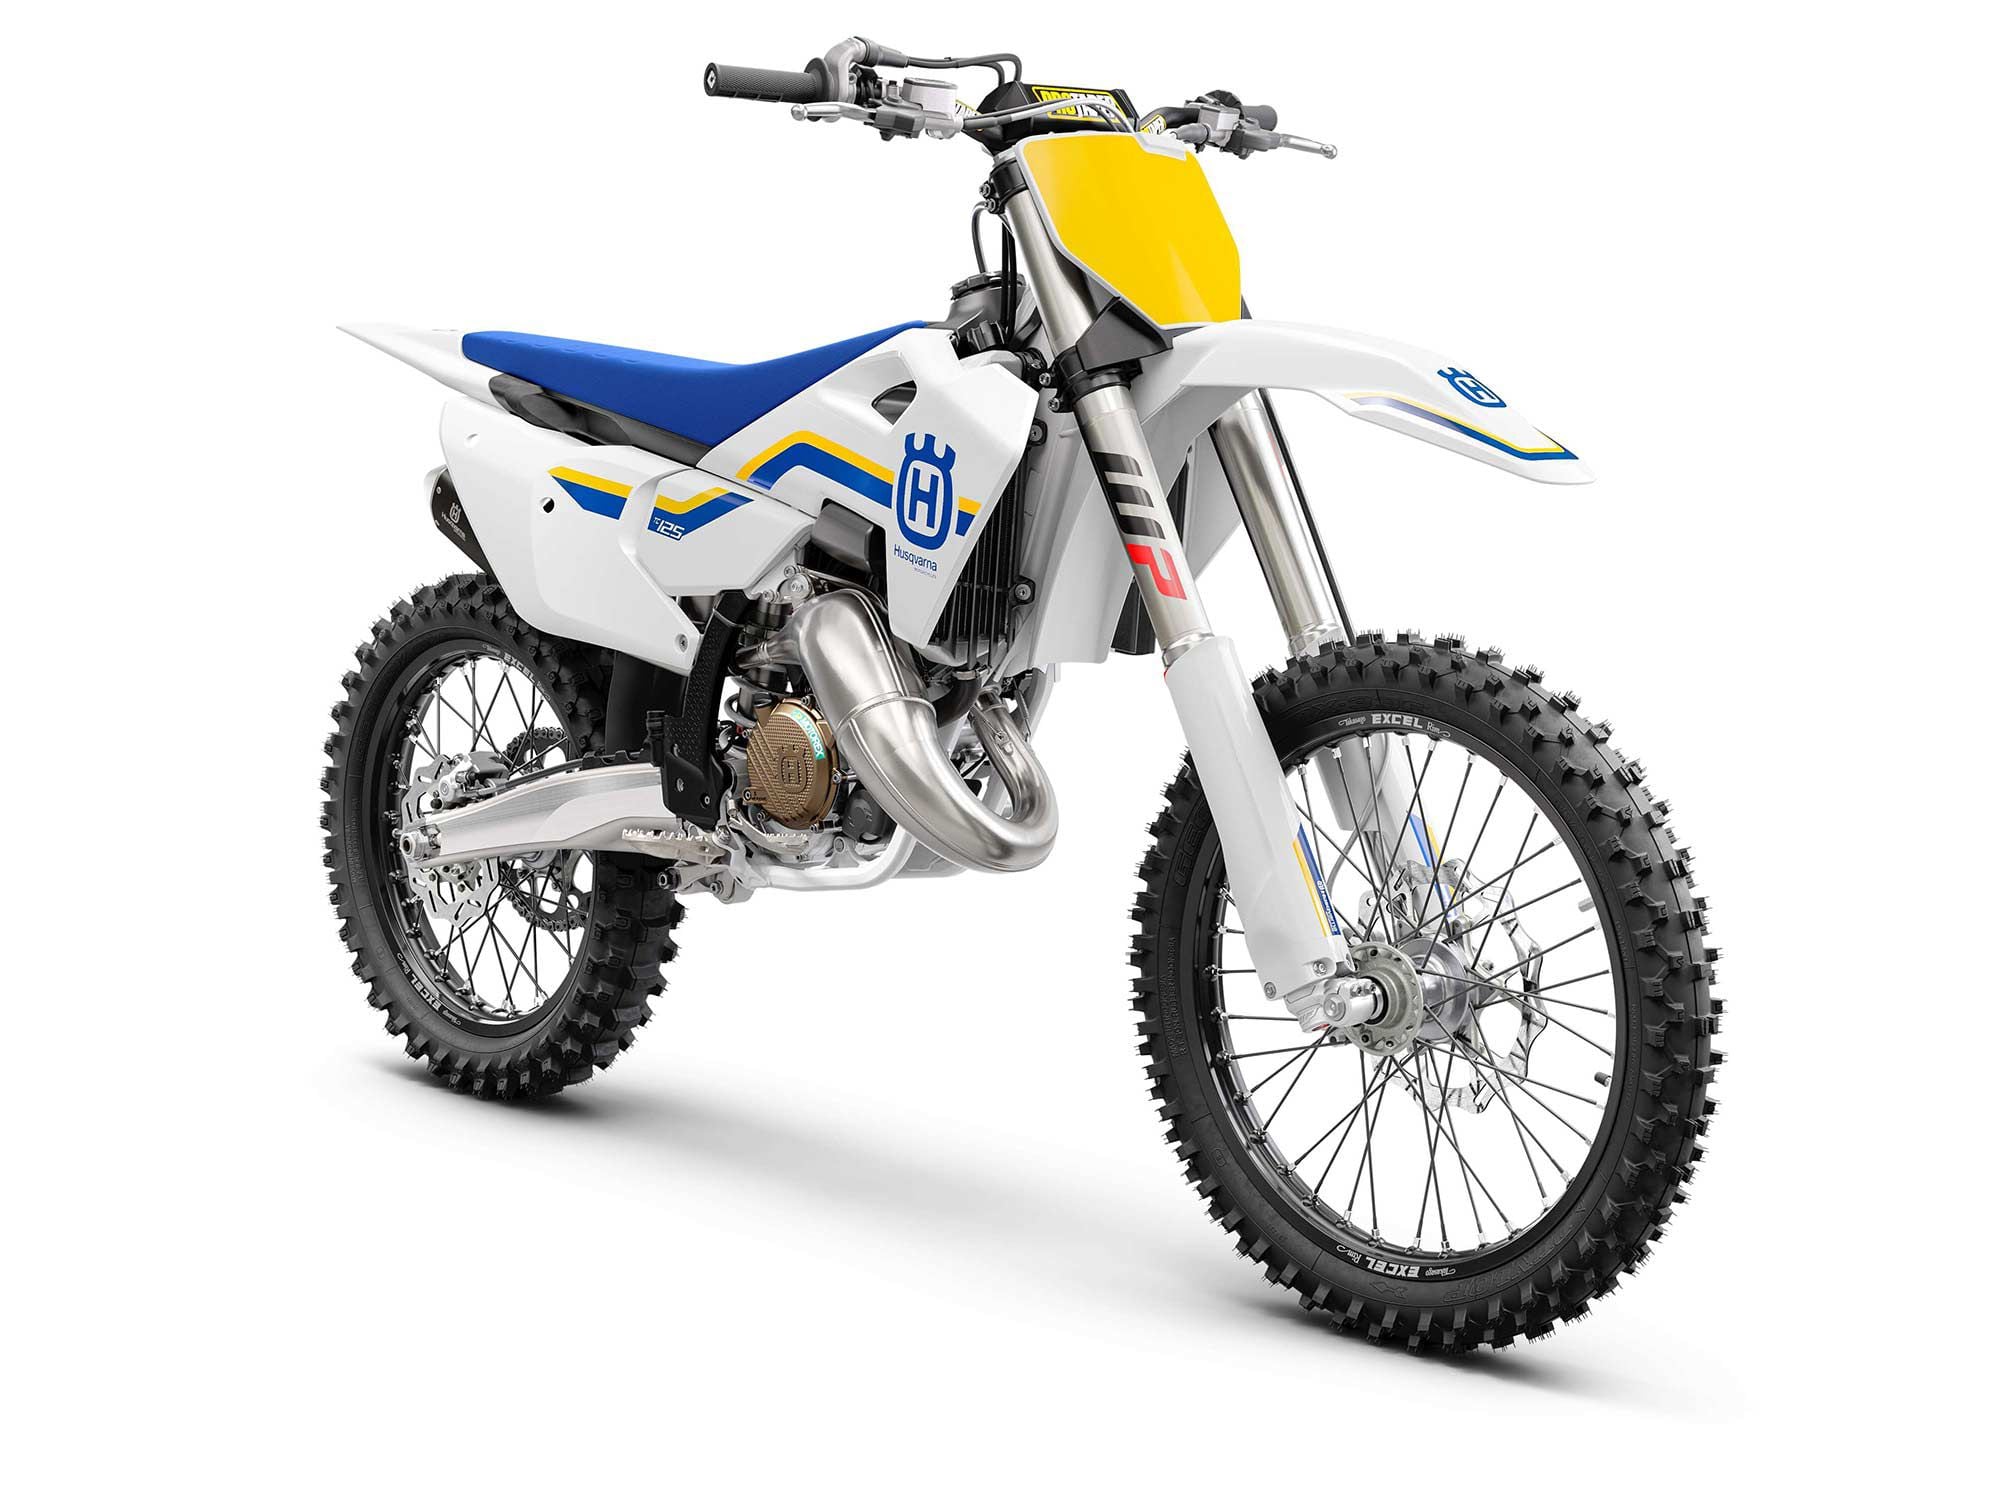 2023 Husqvarna Heritage Motocross and Off-Road Bikes First Look